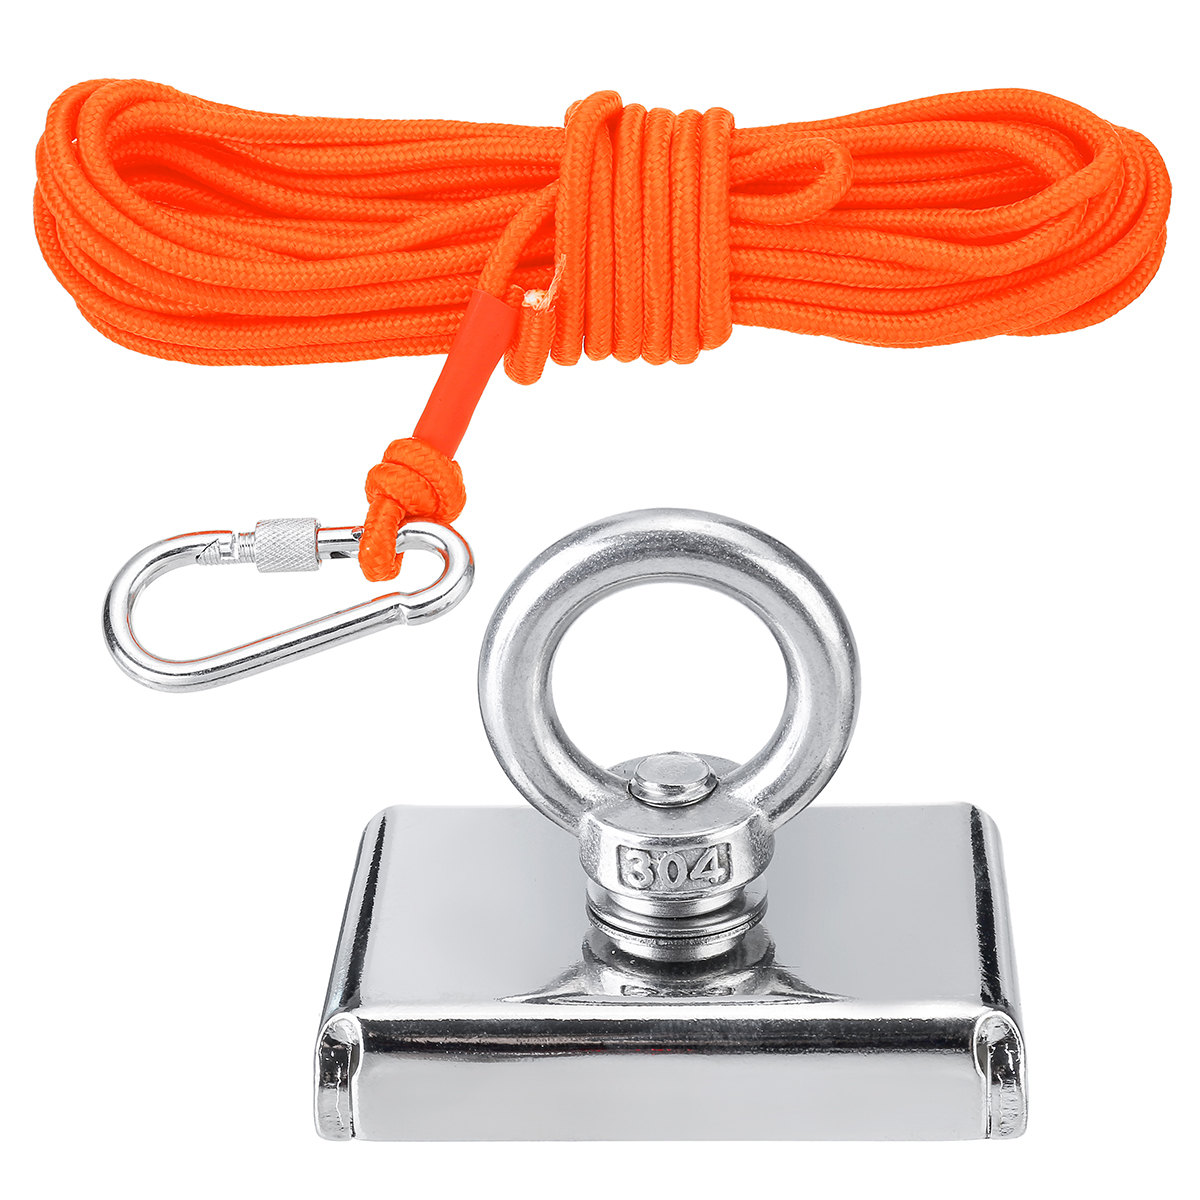 Find 110KG Double Side Neodymium Fishing Salvage Recovery Magnet with 10M Rope for Detecting Metal Treasure for Sale on Gipsybee.com with cryptocurrencies